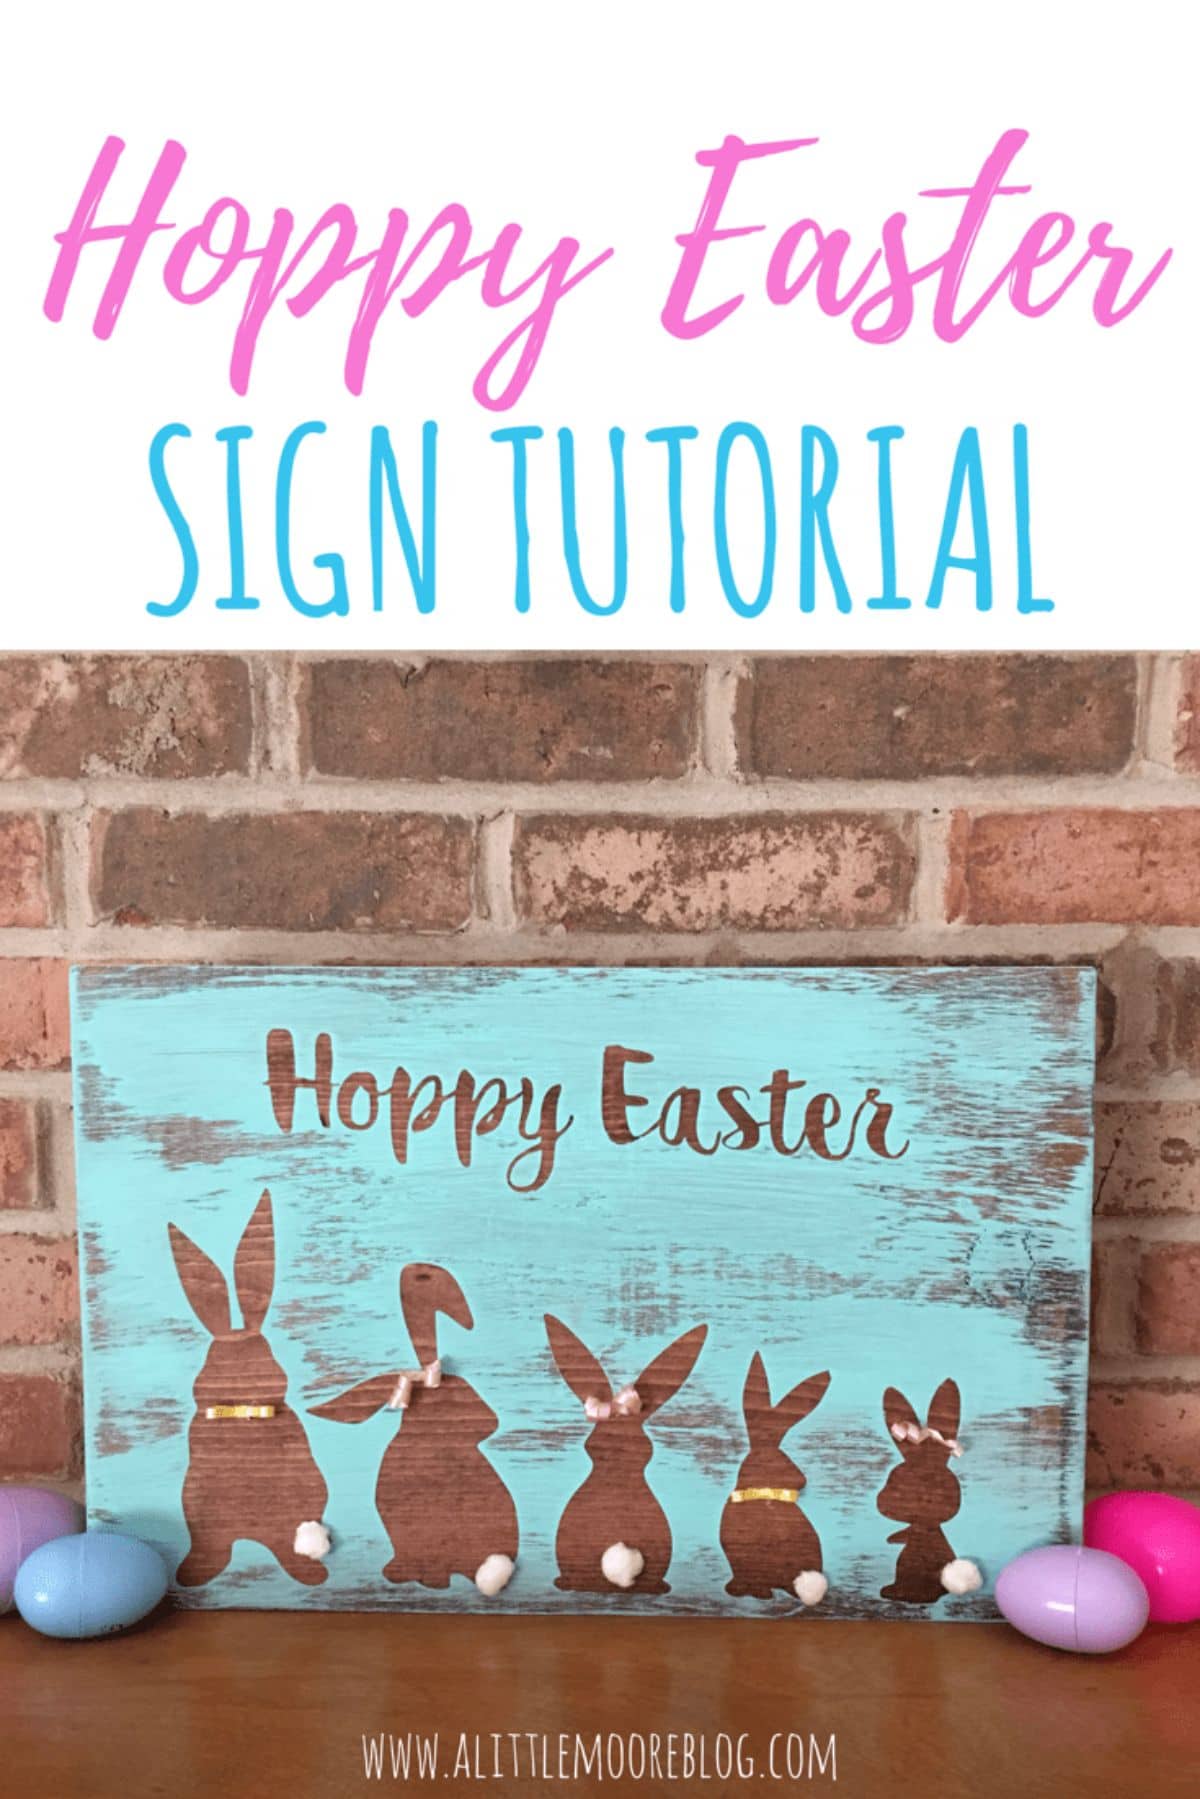 up against a red brick wall sits a wooden sign, with a turquoise background and "Hoppy Easter" at the top. Underneath are 5 bunnies of various sizes